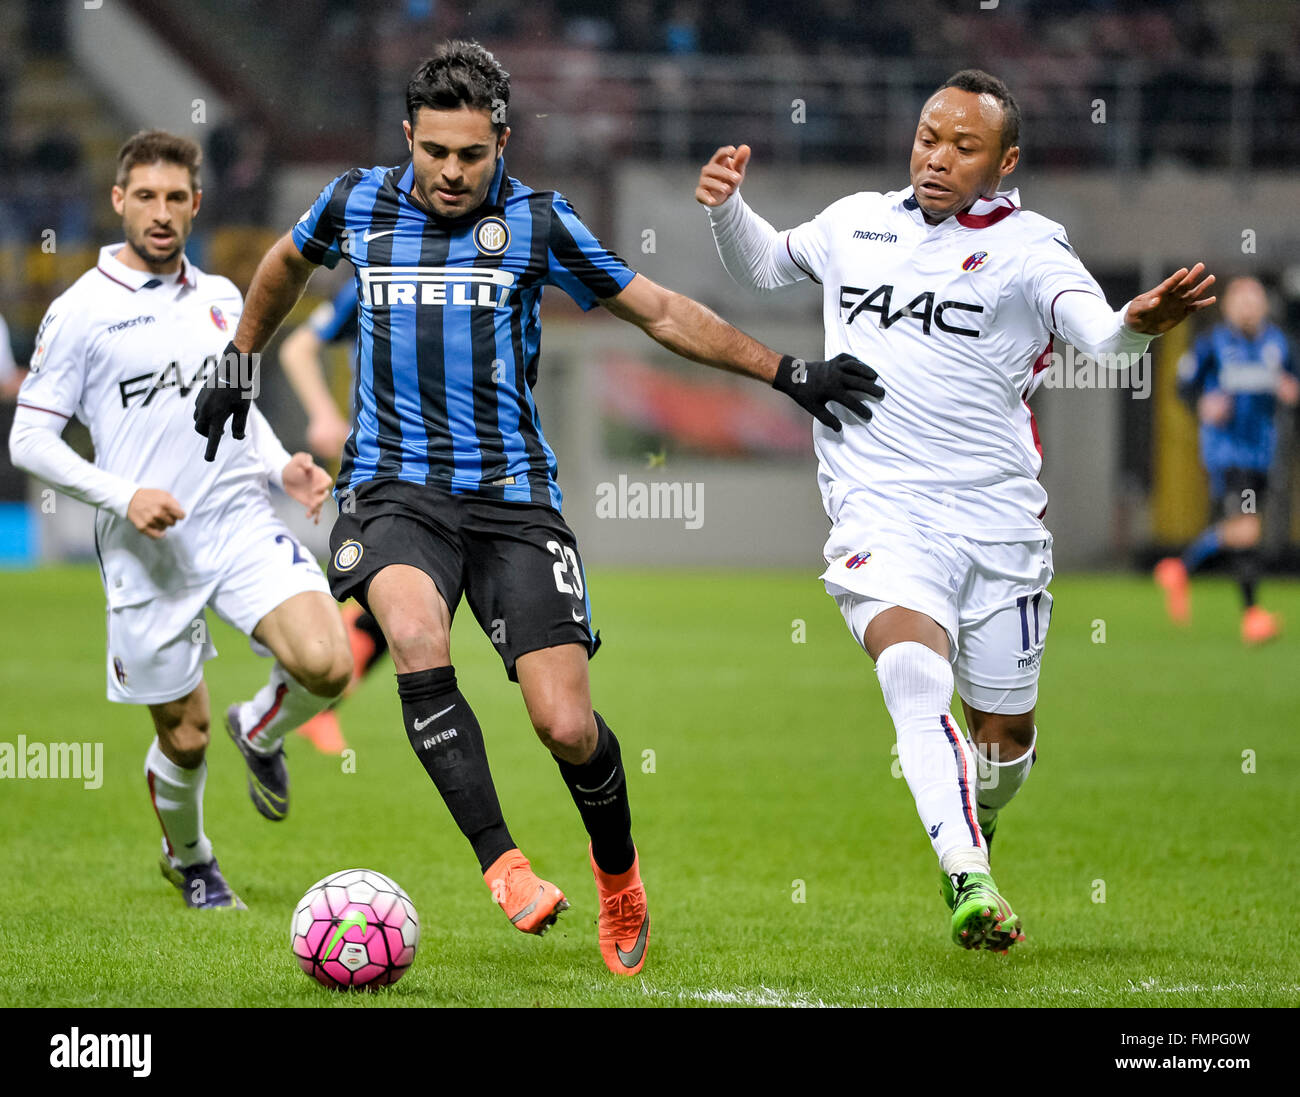 Milan, Italy. 12th Mar, 2016. Citadin Eder (center) and Juan Camilo Zuniga competes for the ball during the Serie A football match between FC Internzionale and Bologna FC. FC Internazionale wins over Bologna FC with final score of 2-1. © Nicolò Campo/Pacific Press/Alamy Live News Stock Photo